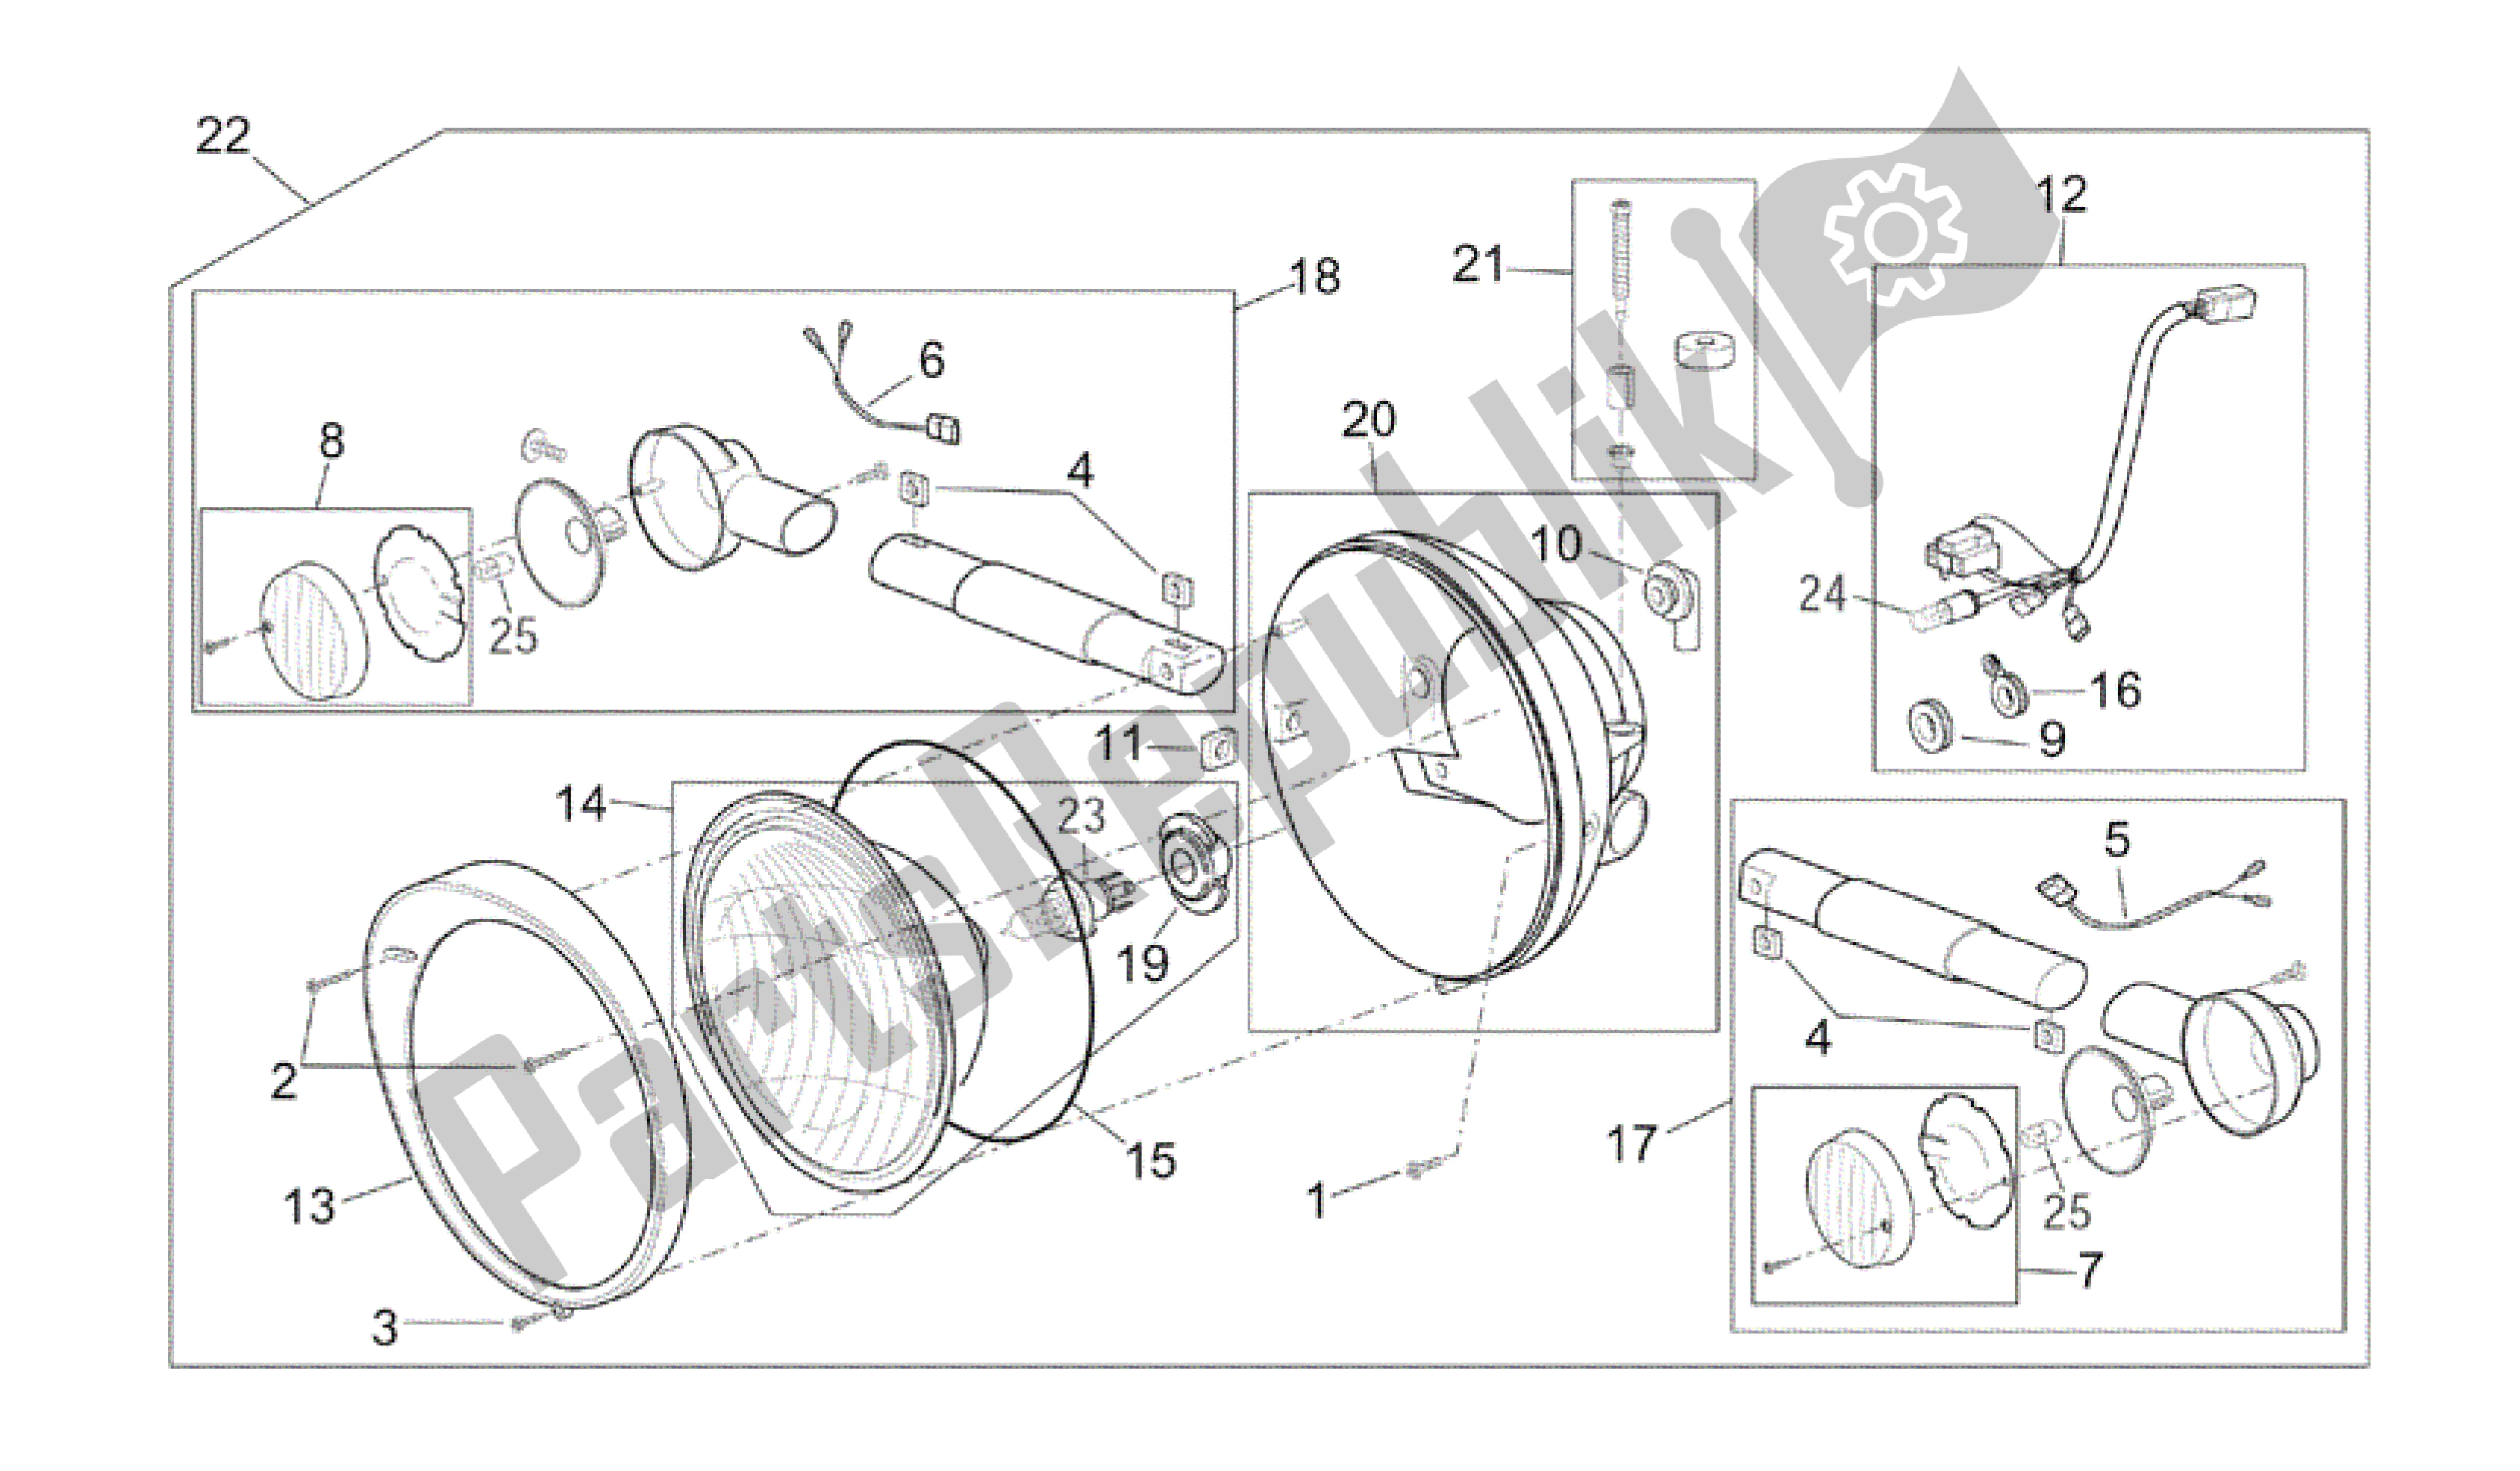 All parts for the Headlight of the Aprilia Scarabeo 150 1999 - 2004